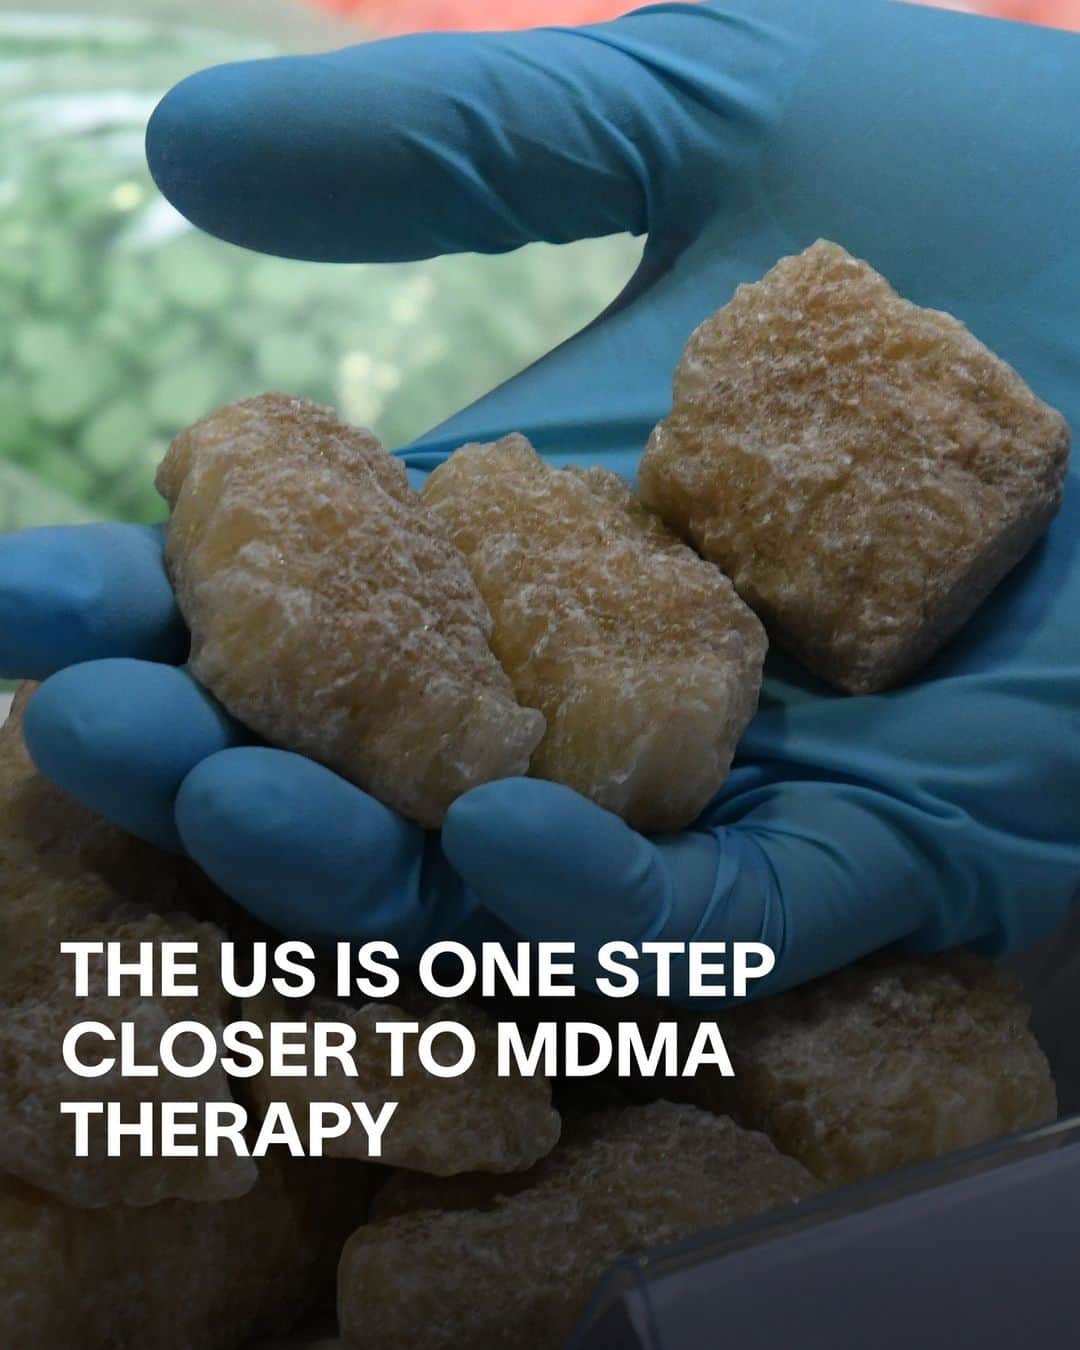 VICEのインスタグラム：「Imagine being prescribed MDMA. If all goes to plan, it might not be too much longer before that becomes a reality. ⁠ ⁠ An organization that's been conducting clinical trials on MDMA therapy has filed a new drug application with the FDA that would make the drug legal for treating post-traumatic stress disorder if approved. ⁠ ⁠ The Multidisciplinary Association for Psychedelic Studies (MAPS), a non-profit that promotes the regulation of psychedelics, said Tuesday it filed the application for MDMA capsules, which would be used in conjunction with psychotherapy or talk therapy and other supportive services. ⁠ ⁠ If approved by the FDA, MDMA would be rescheduled by the DEA so that it could be prescribed.⁠ ⁠ Read more at the link in bio.」